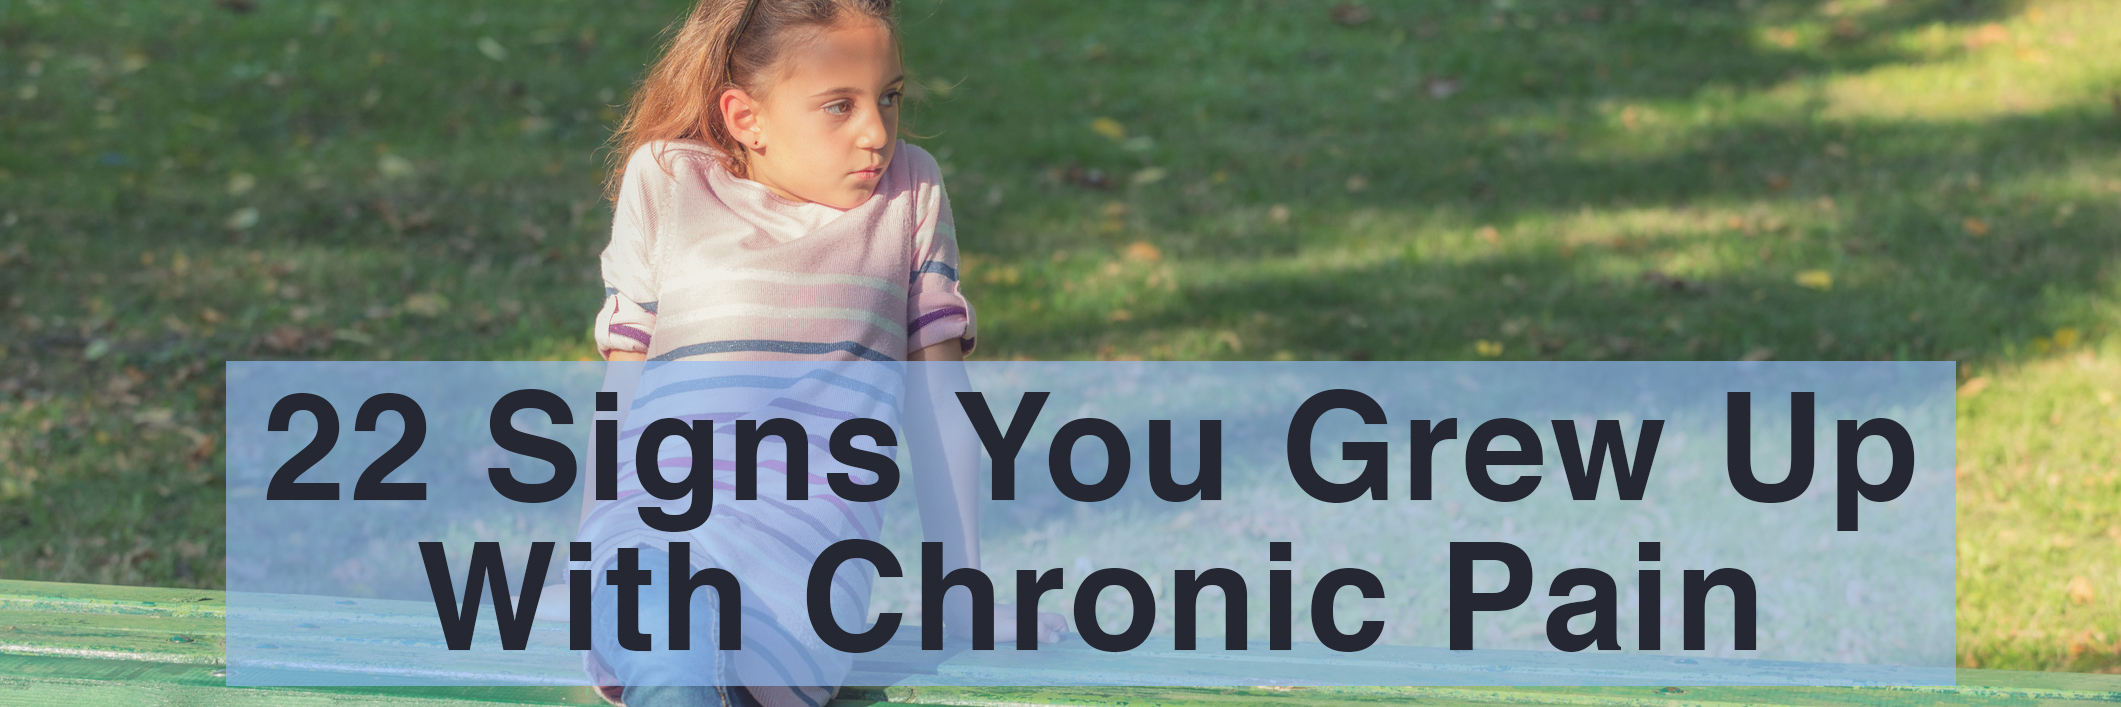 22 signs you grew up with chronic pain